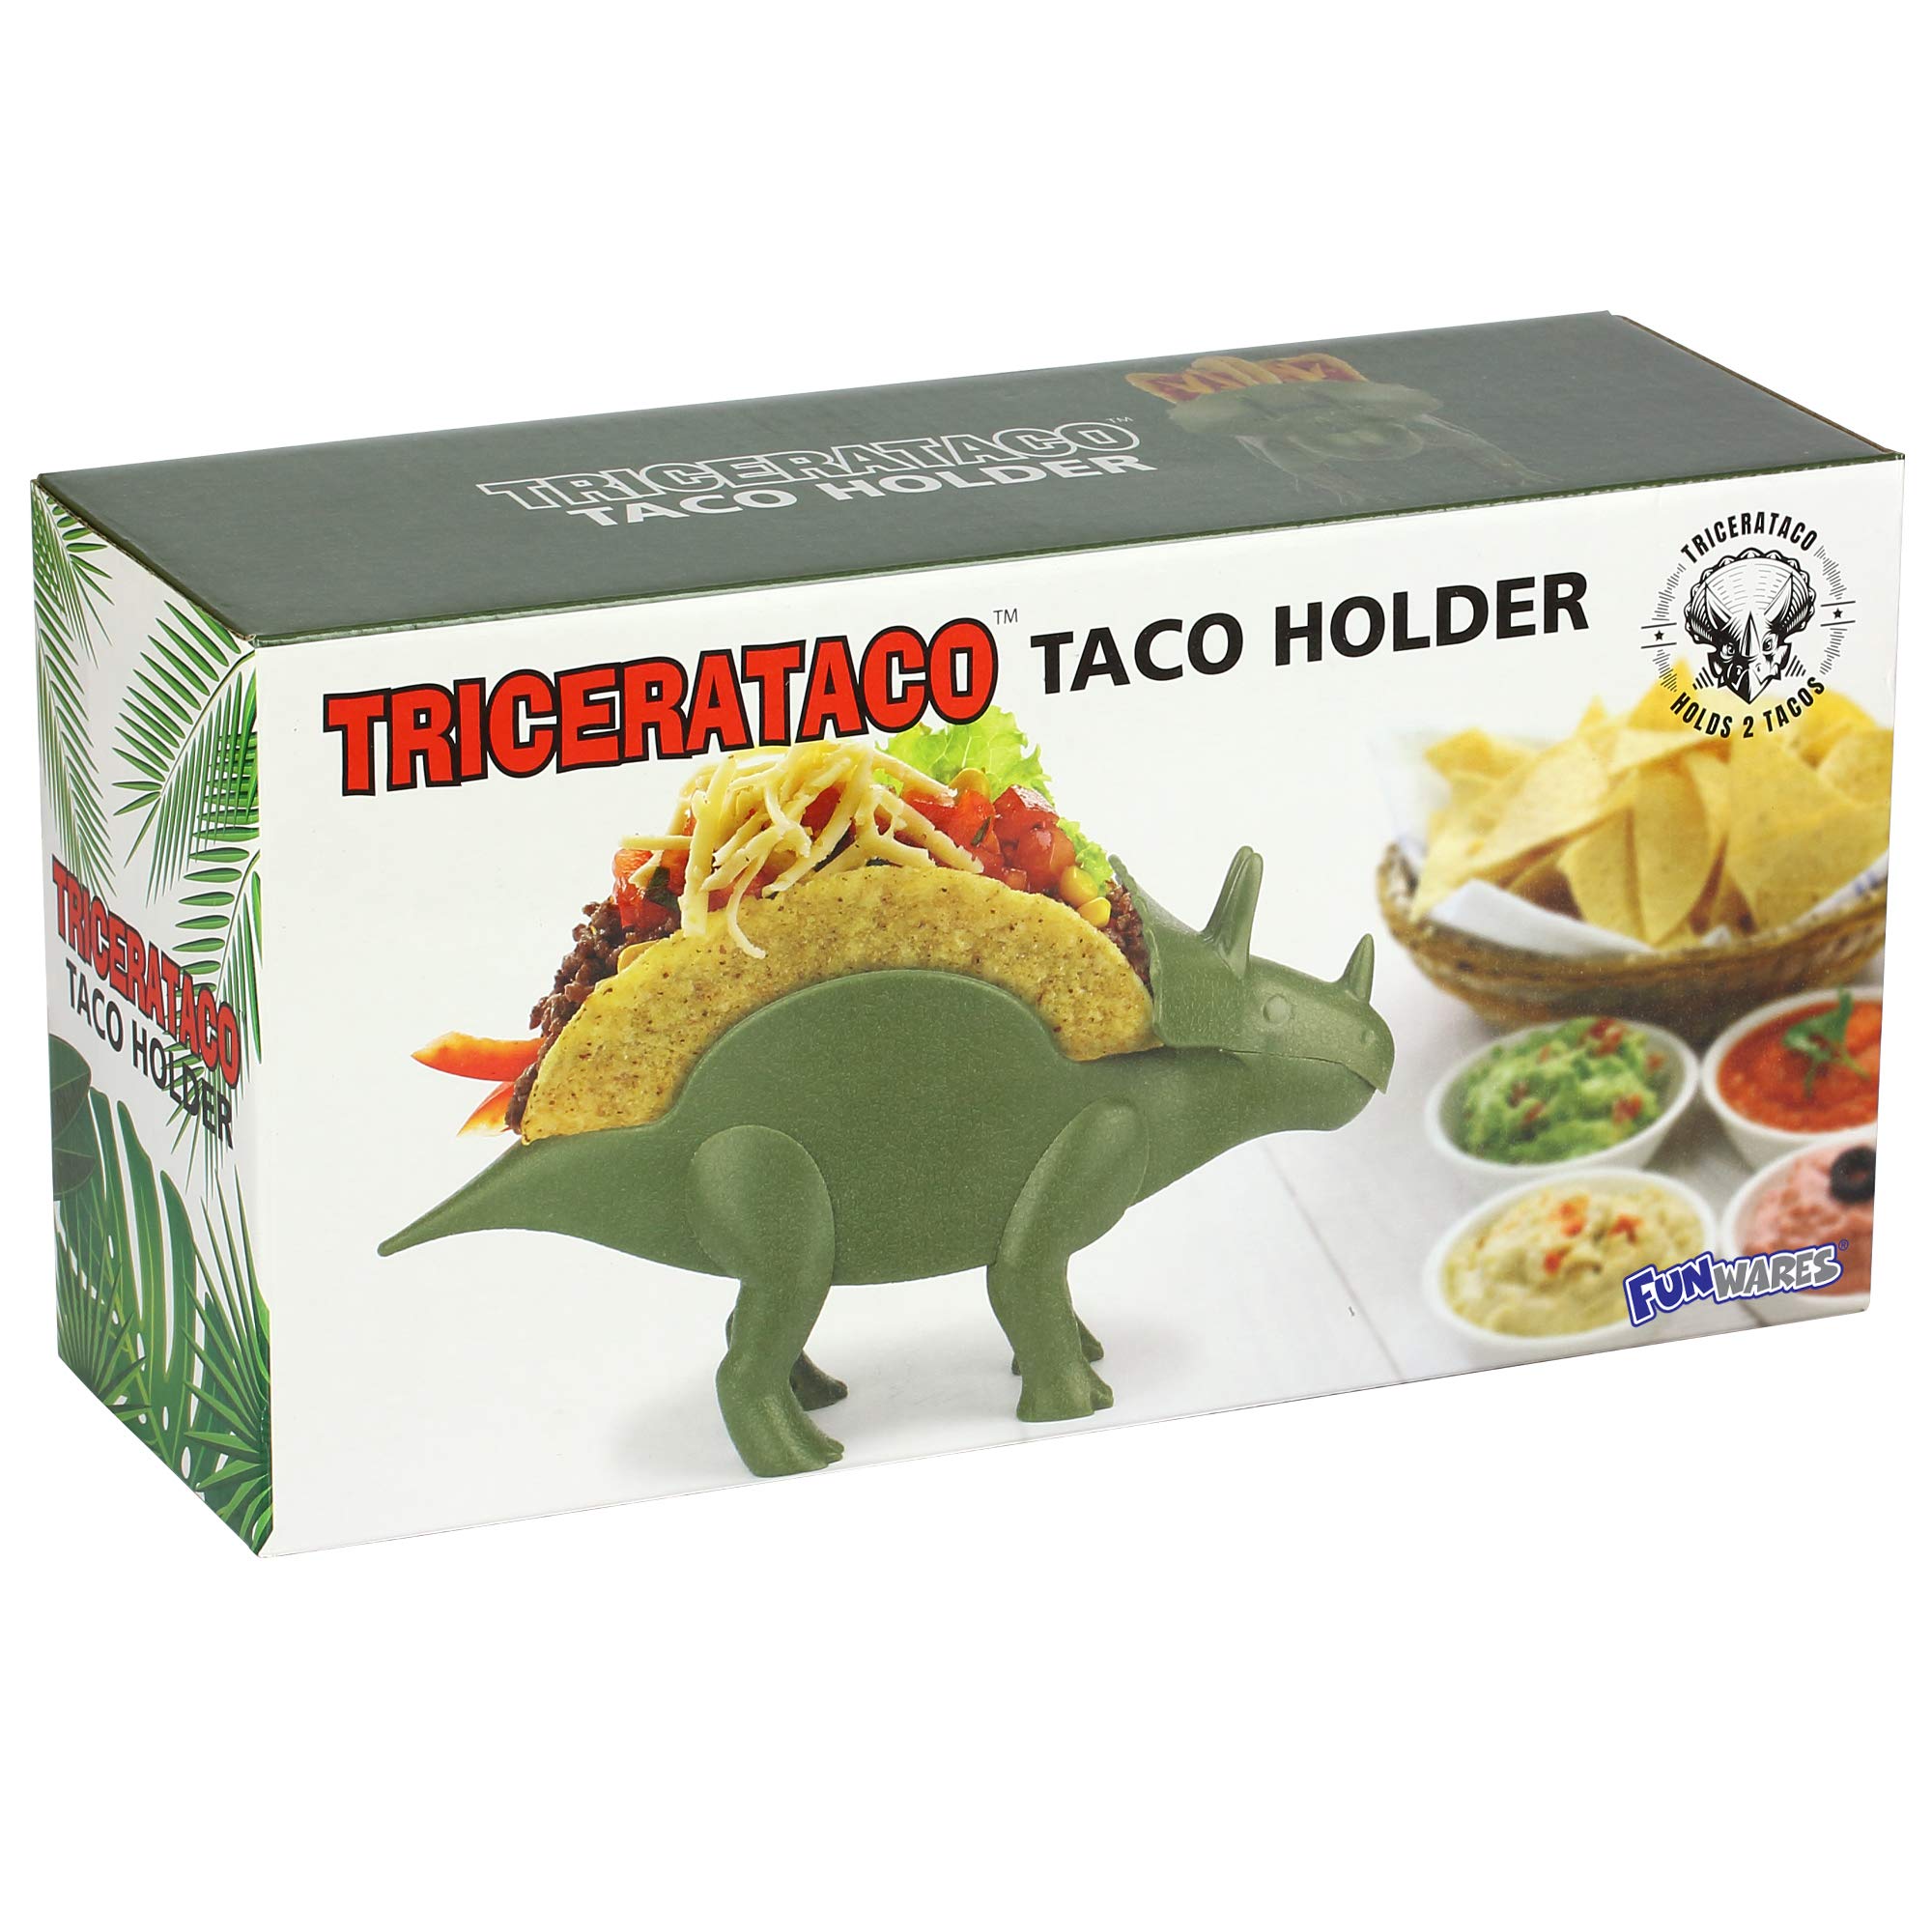 Funwares Original Tricerataco - The Ultimate Dinosaur Taco Holder, Fun and Practical White Elephant Gift, Hold 2 Tacos